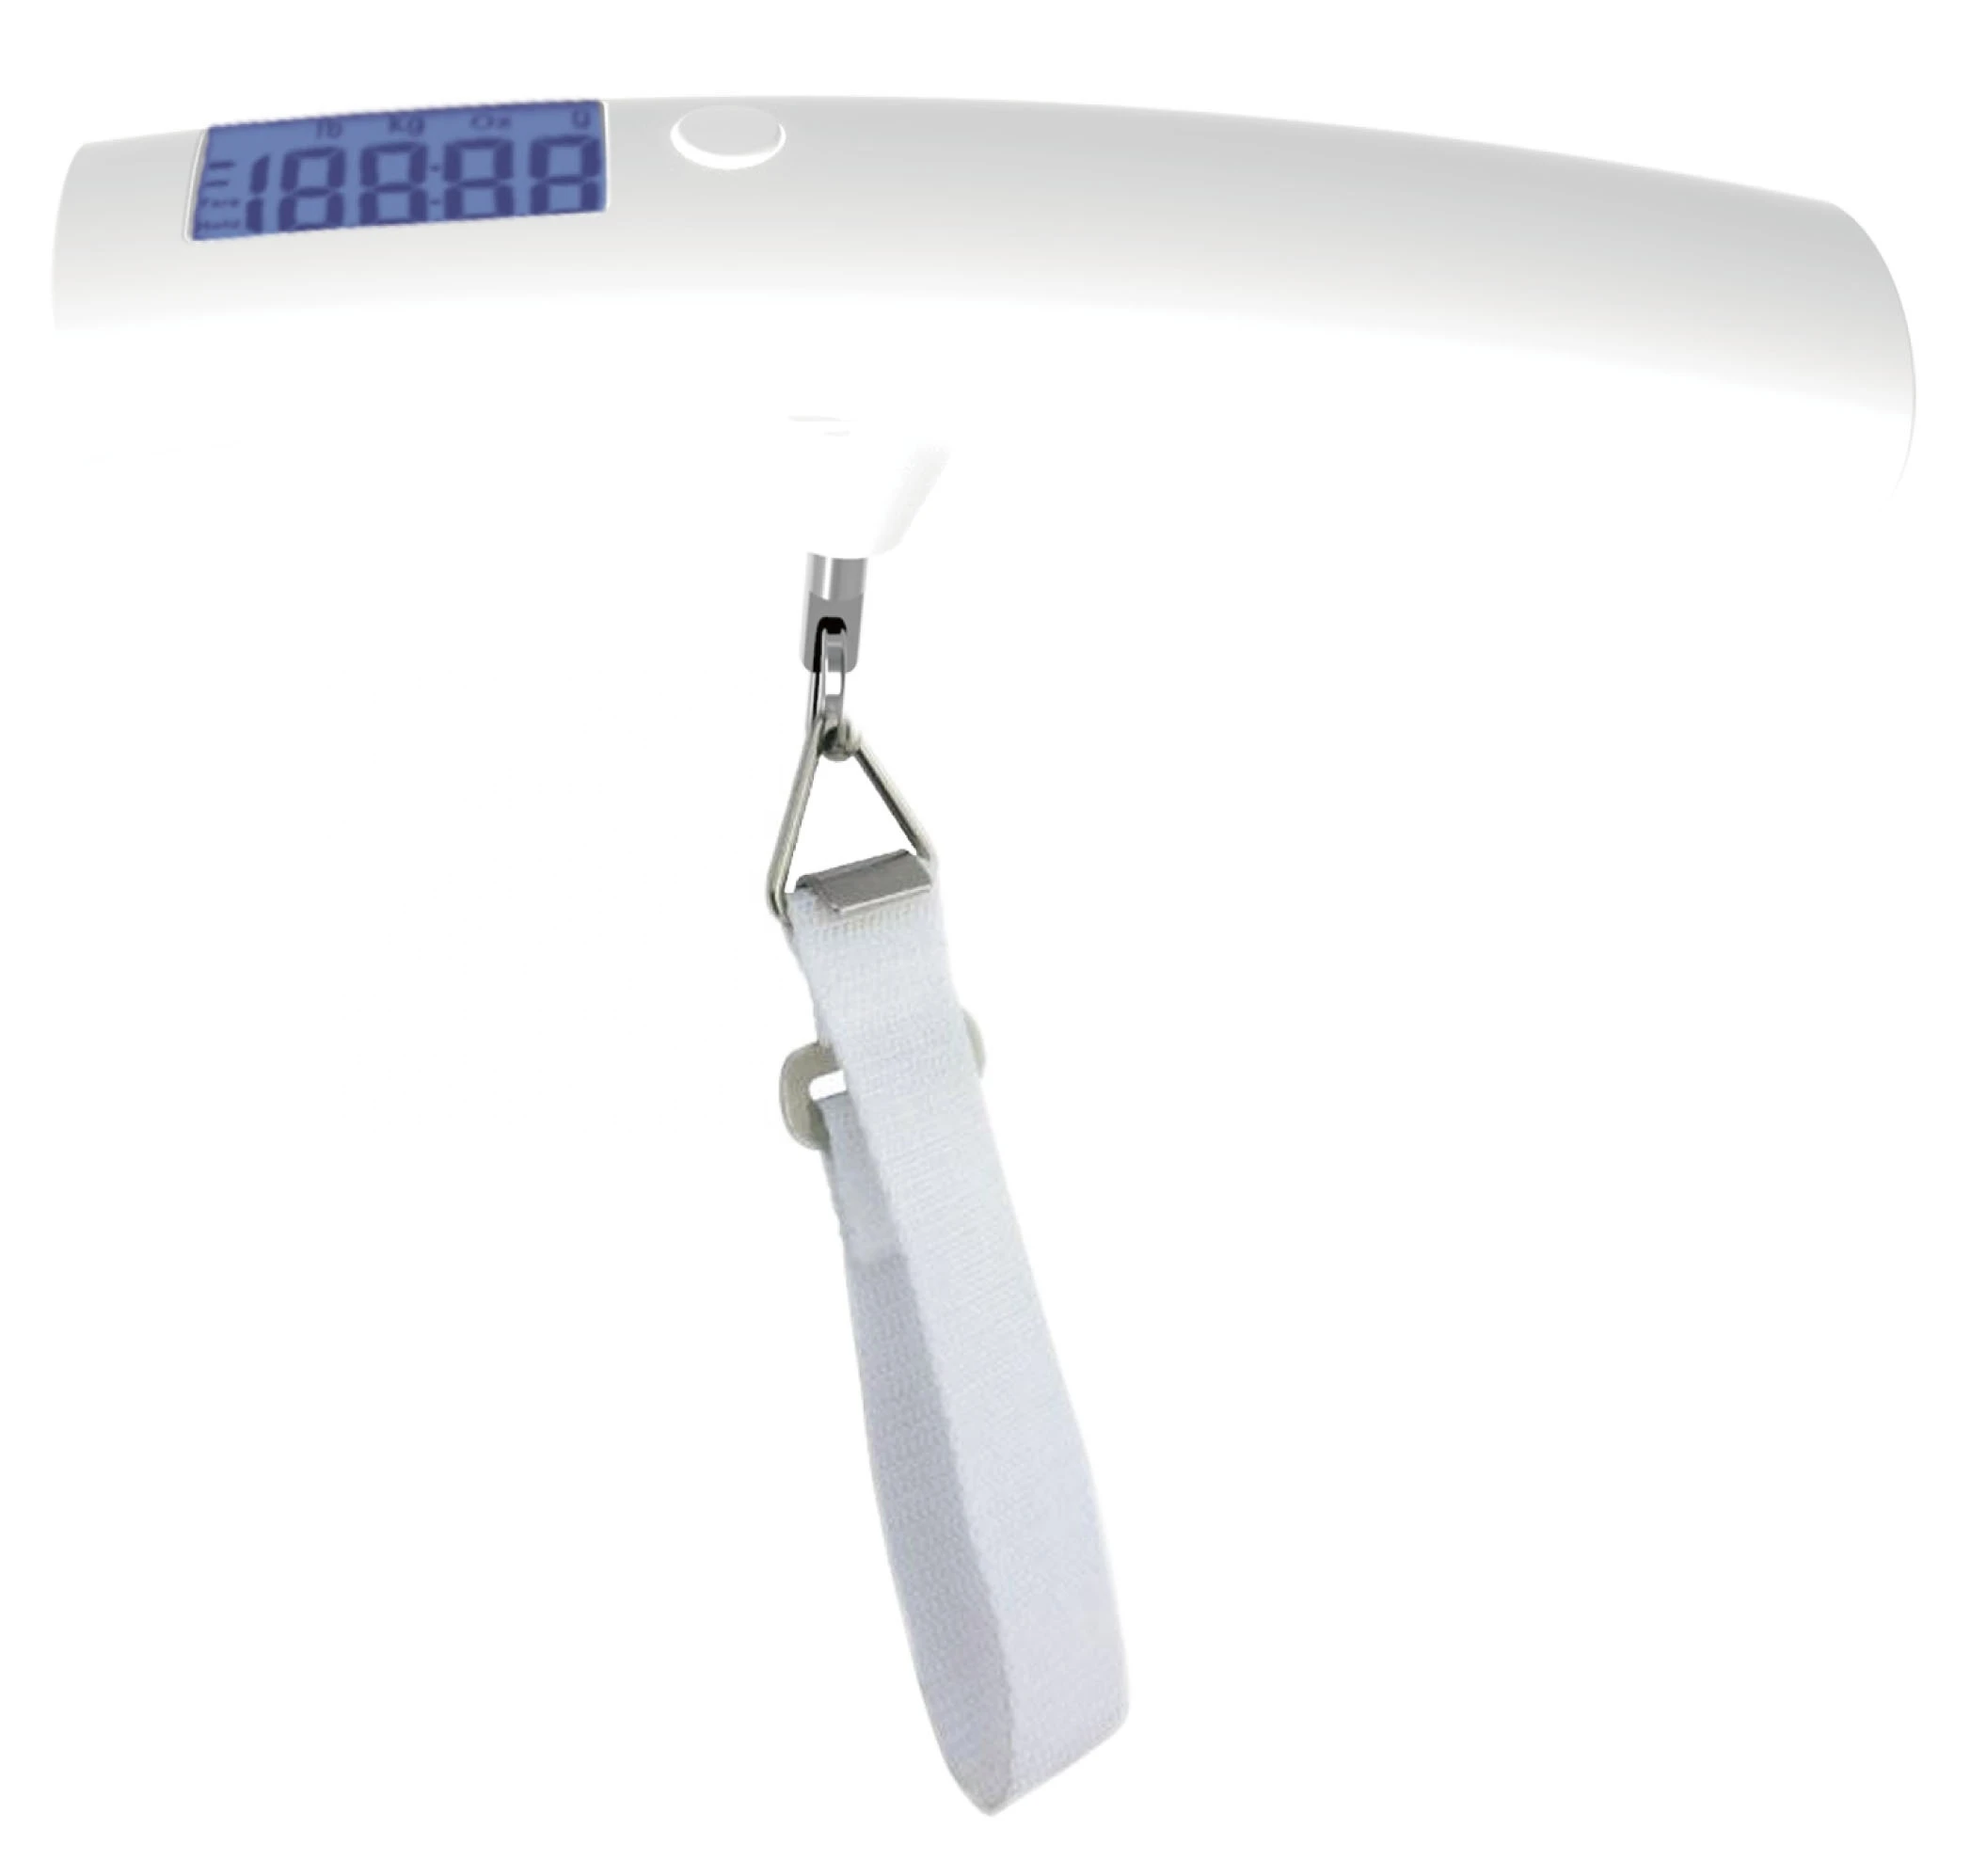 50kg Portable Mini Suitcase Weighing Scale Digital Luggage Scale